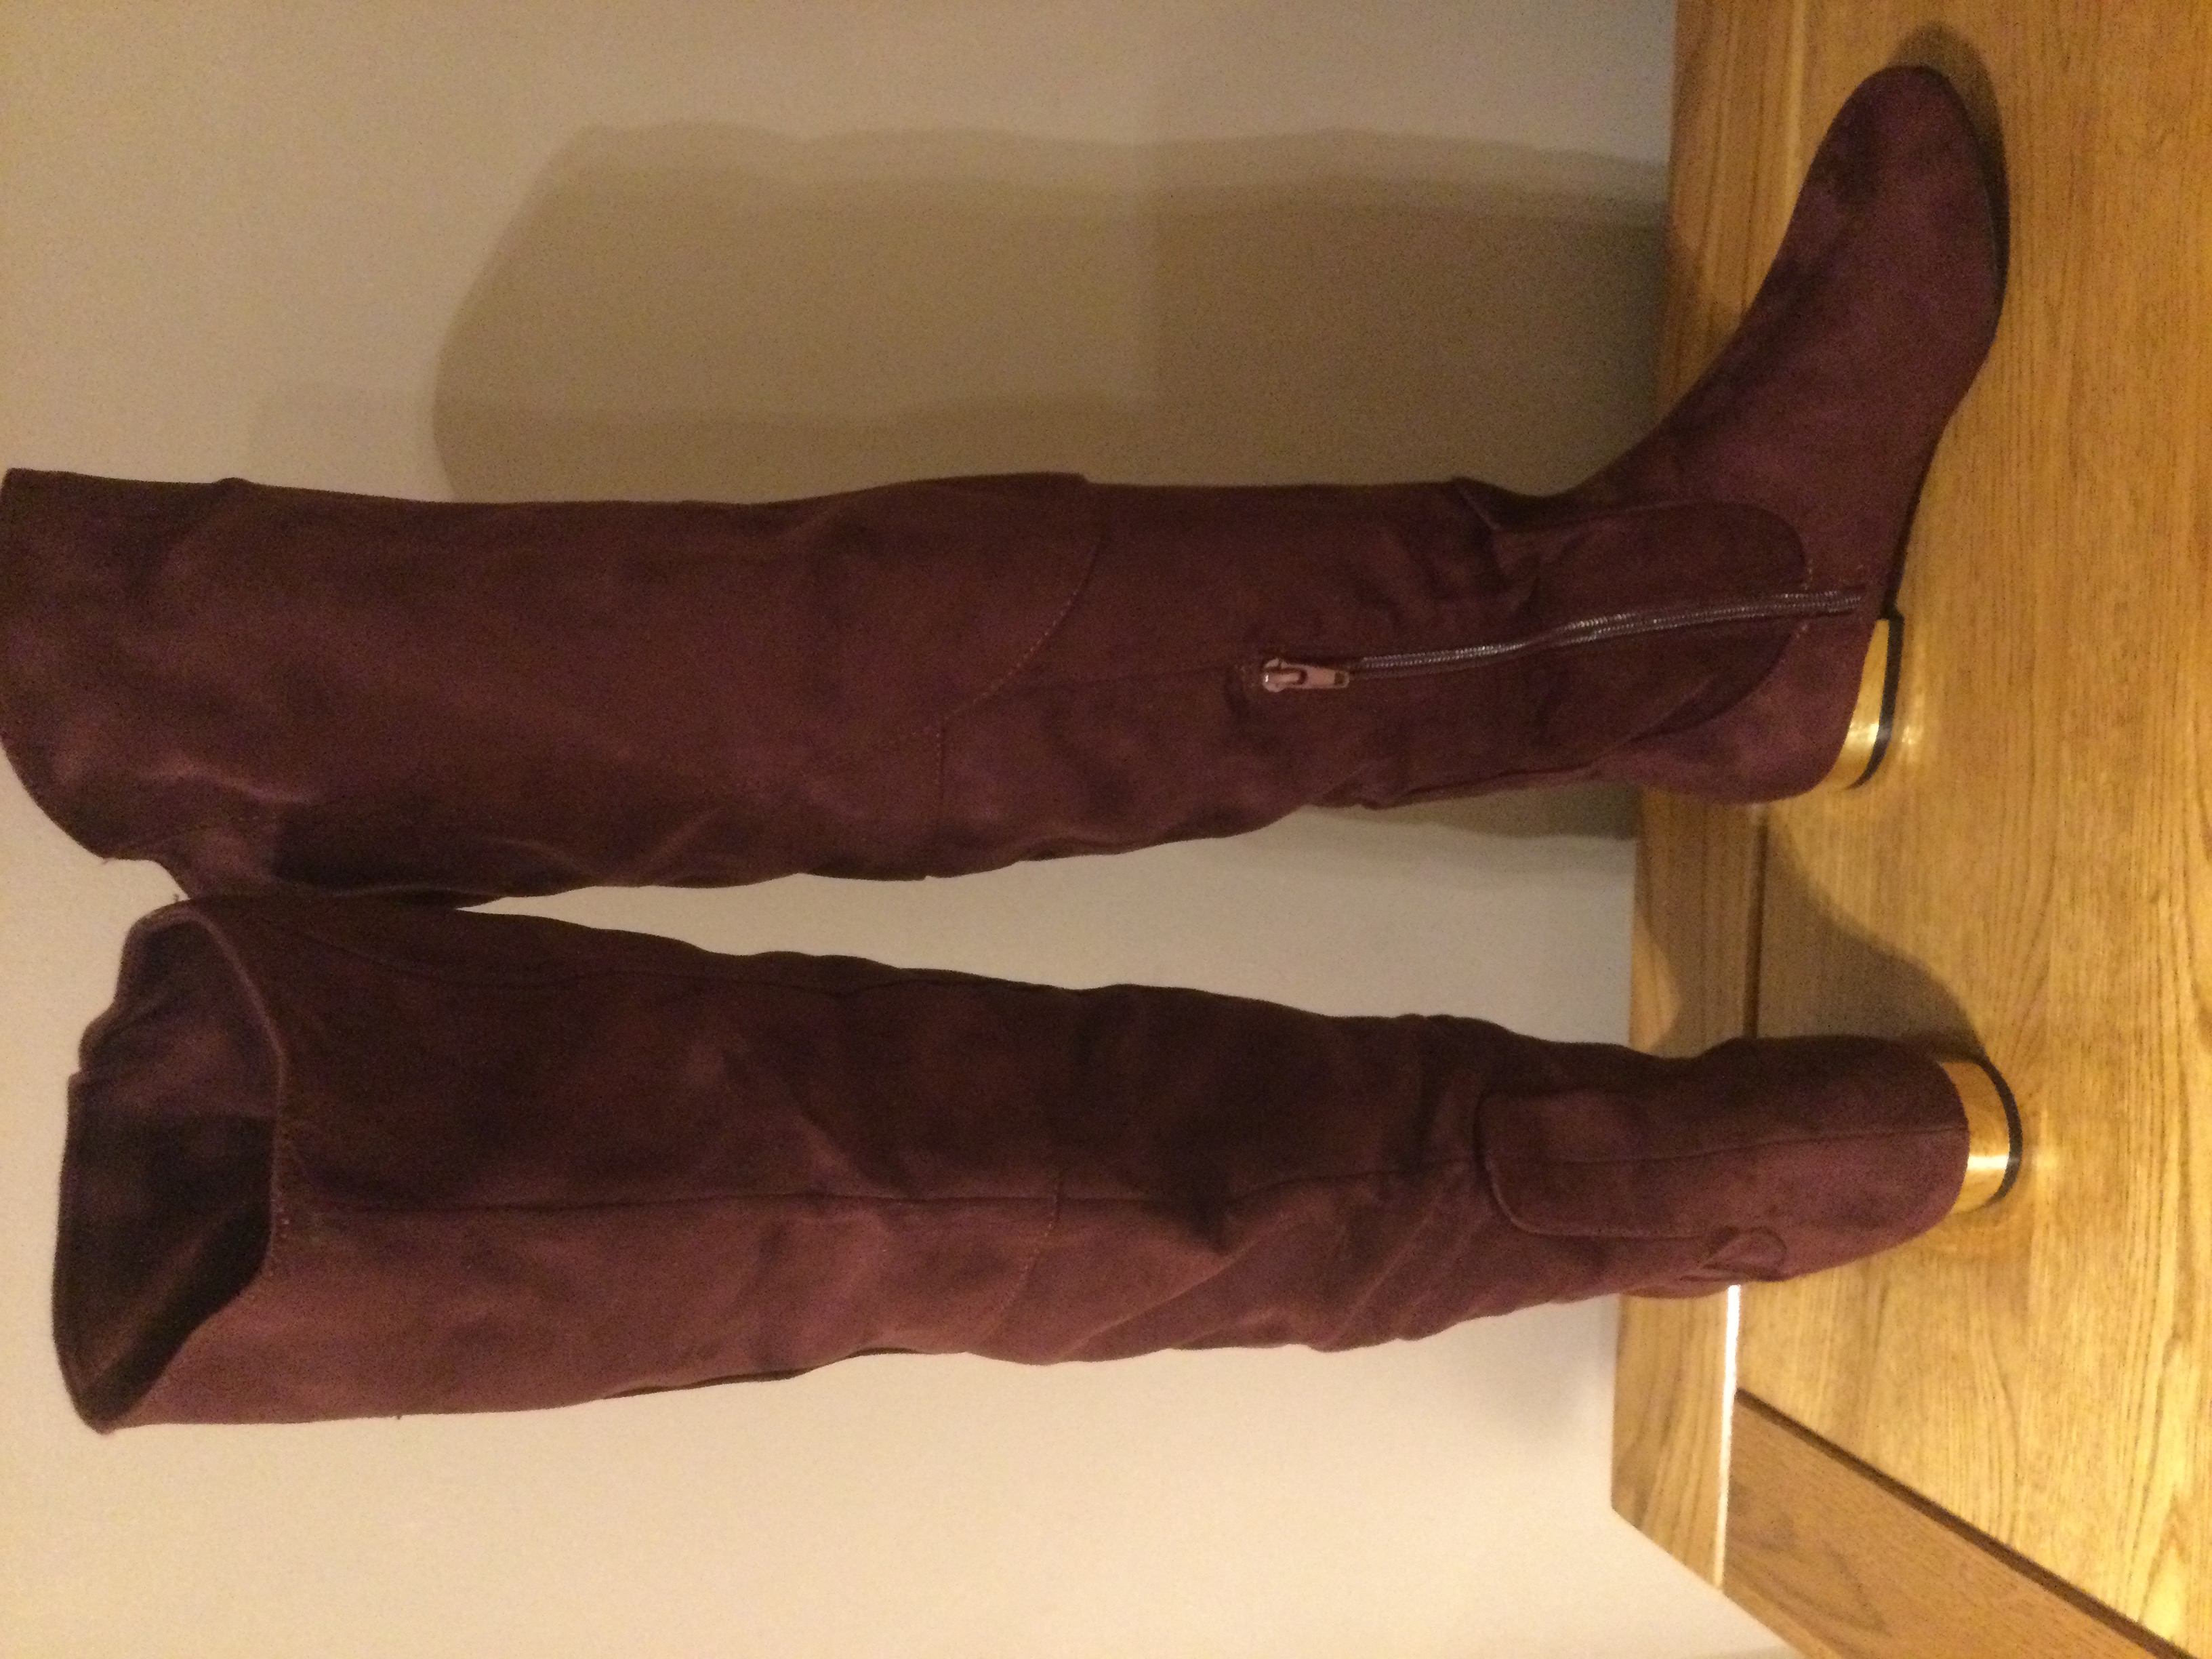 Dolcis “Katie” Long Boots, Low Block Heel, Size 5, Burgundy- New RRP £55.00 - Image 3 of 7